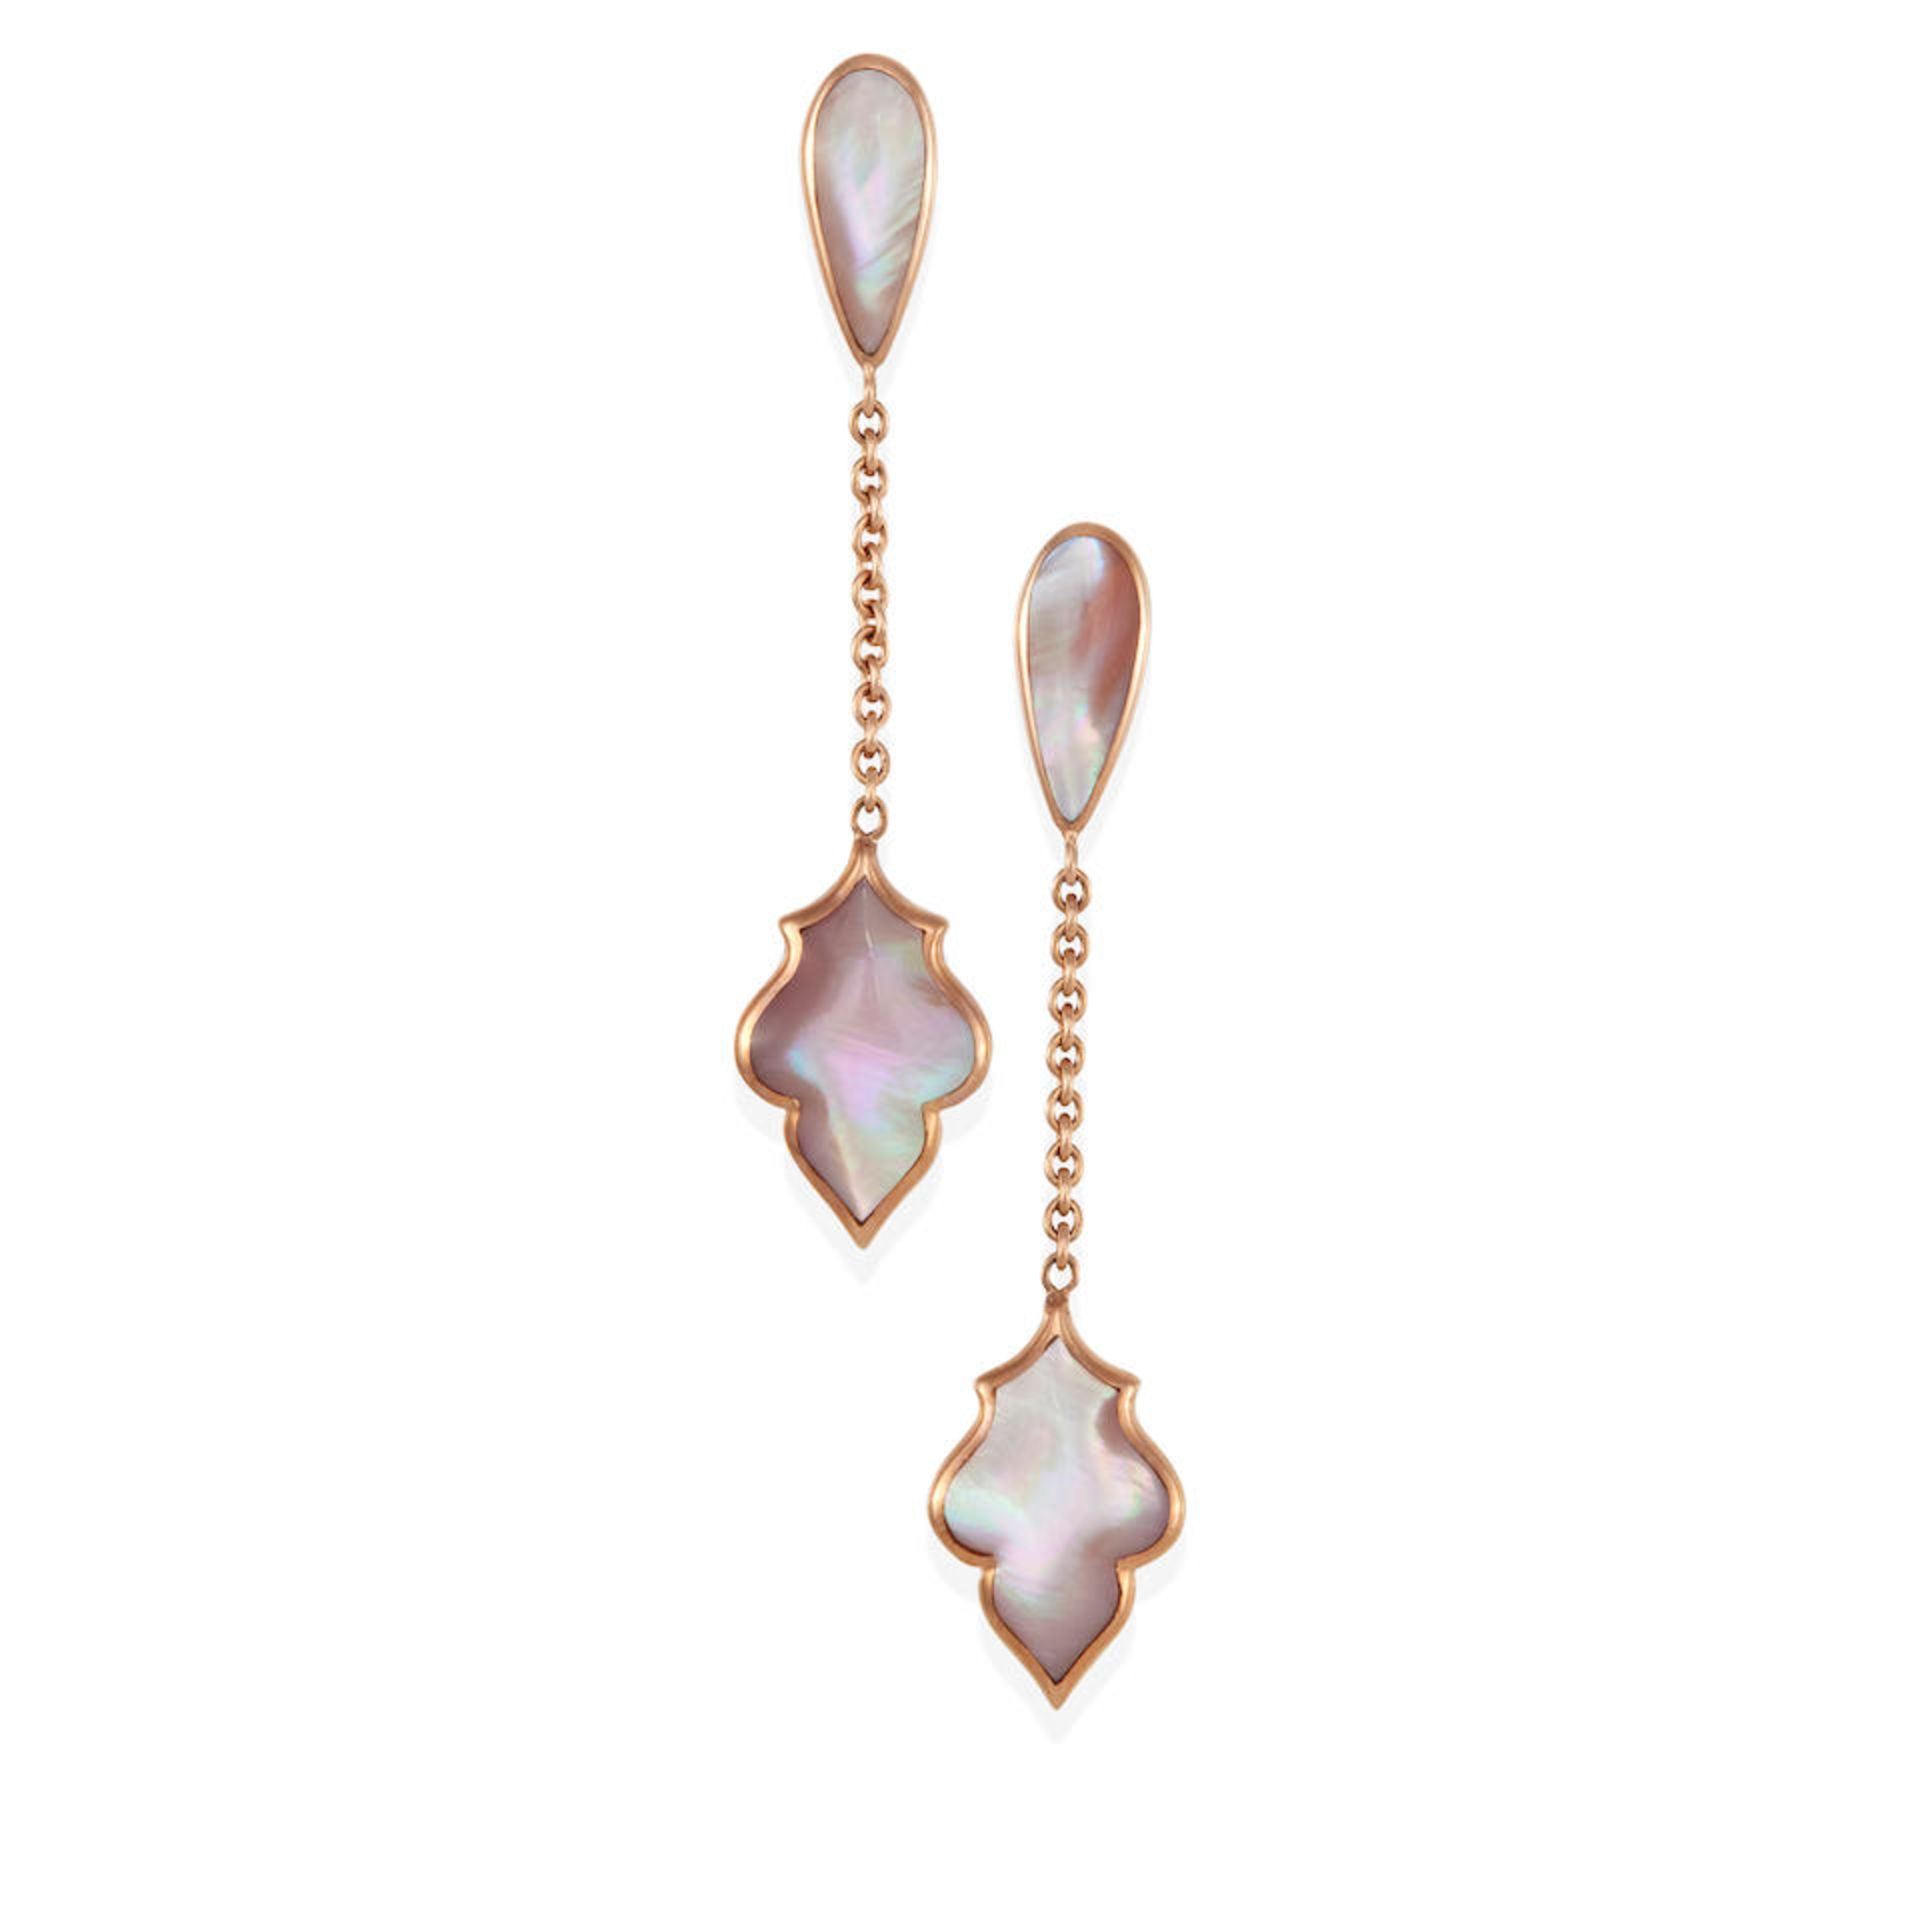 KABANA: A PAIR OF 14K ROSE GOLD AND MOTHER-OF-PEARL PENDANT EARRINGS